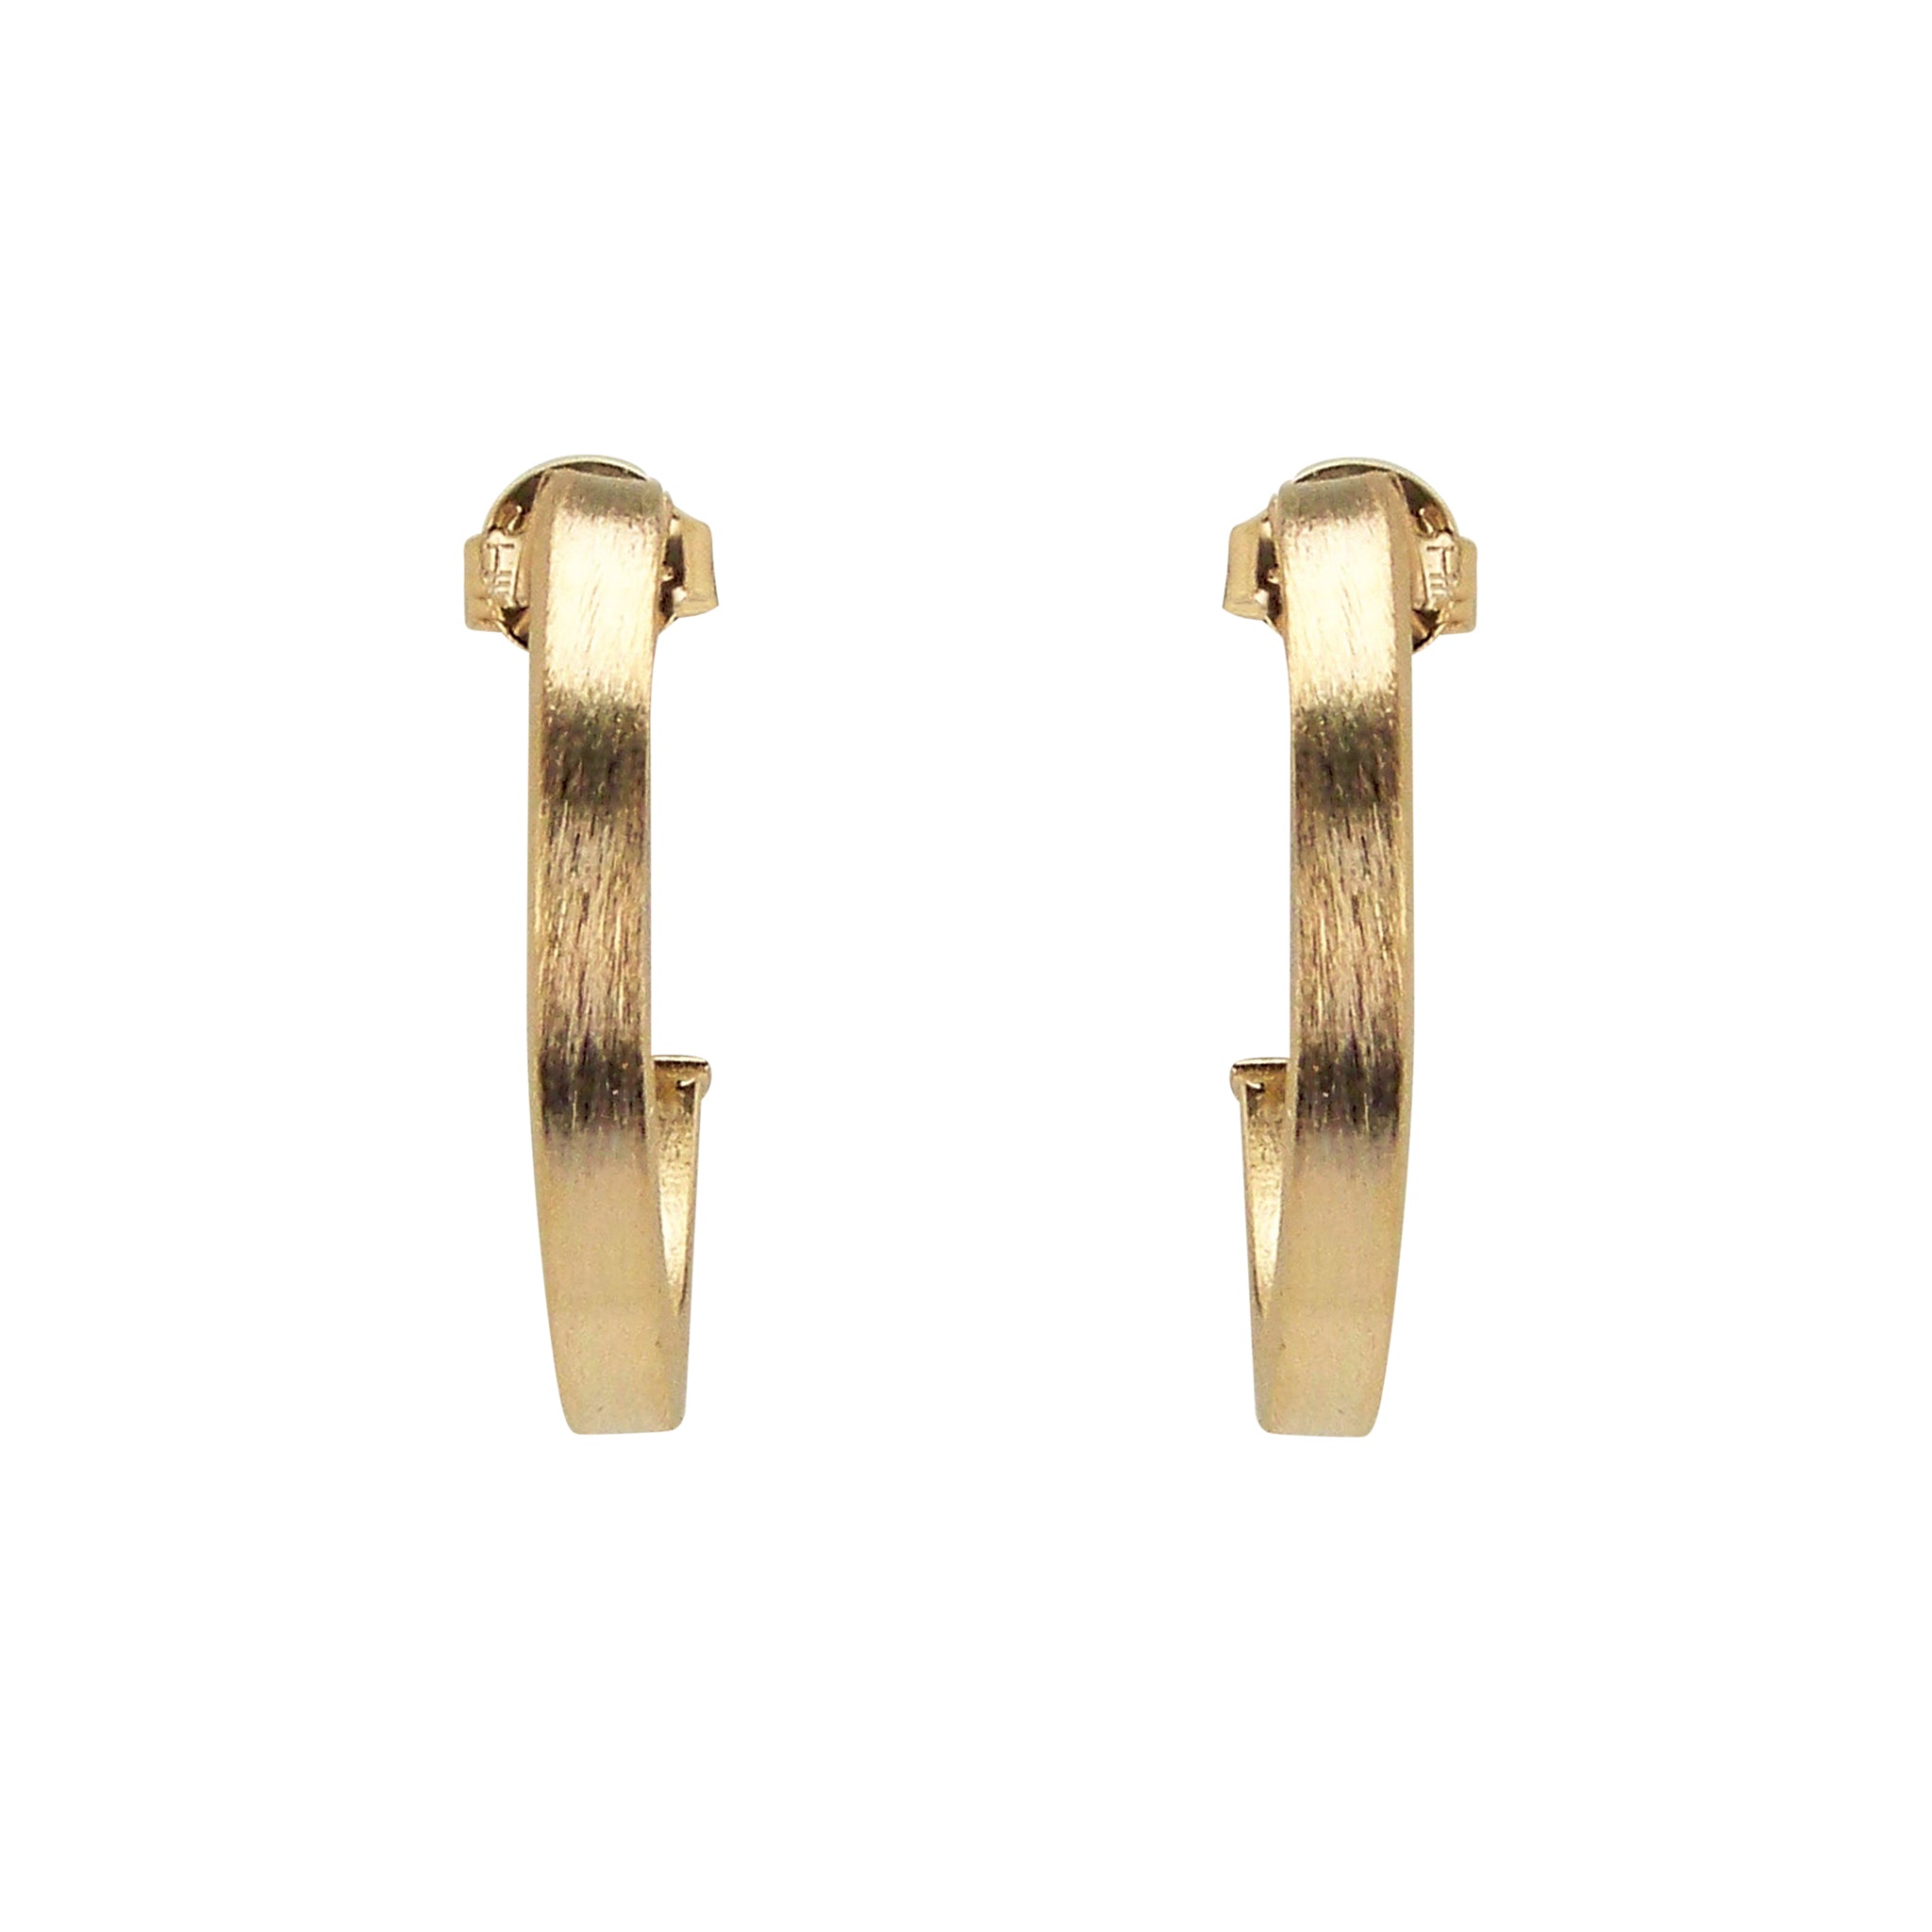 Front View of Sheila Fajl Ilana Bold Square Tube Hoop Earrings in Champagne